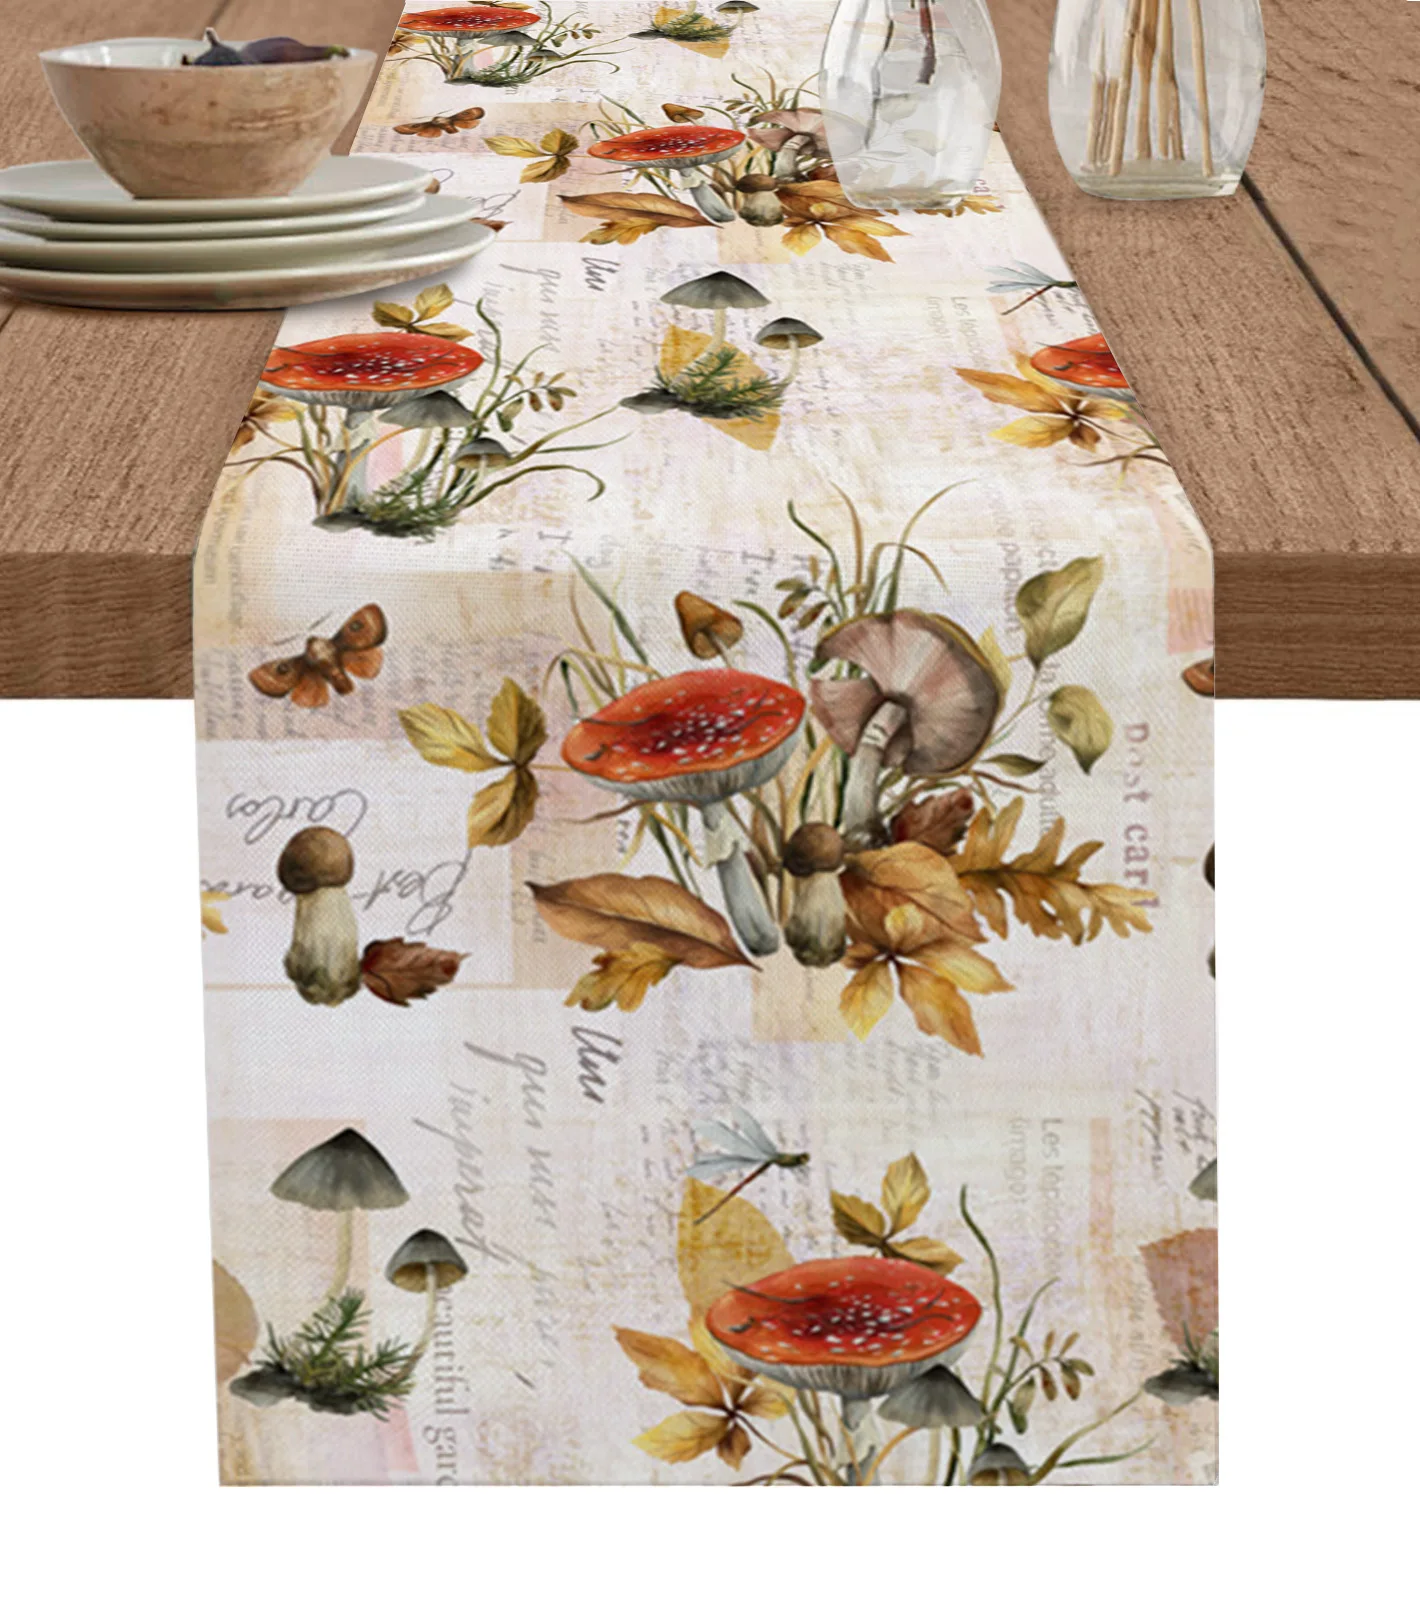 

Fall Mushroom Flower Butterfly Dragonfly Table Runner for Wedding Decoration Modern Party Home Decoration Tablecloth